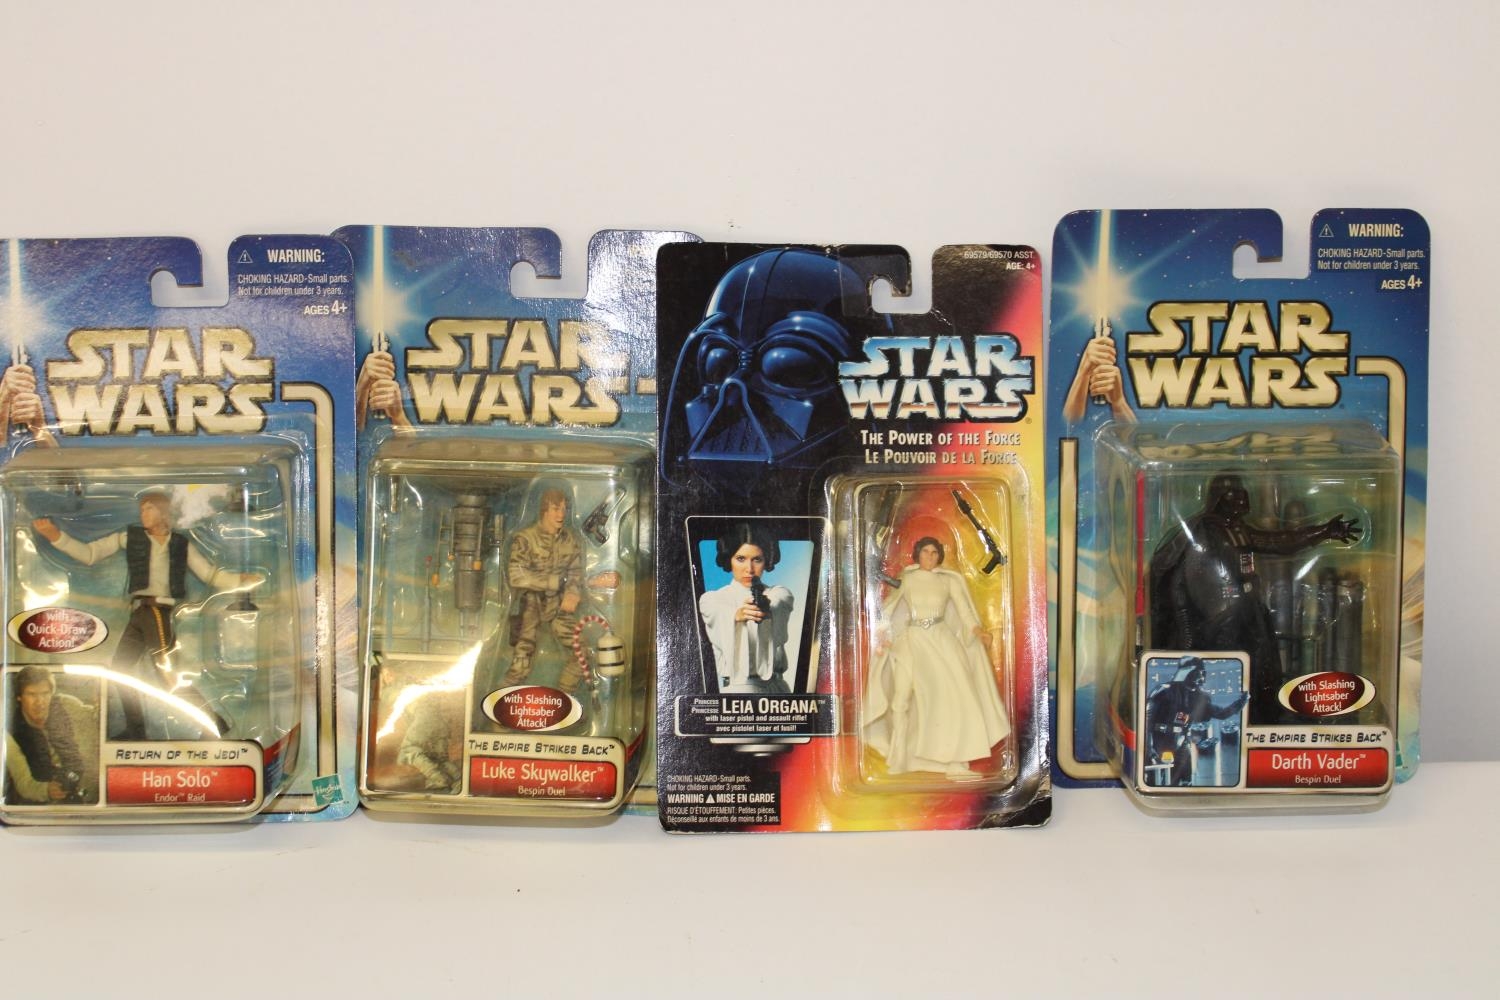 Four boxed Star Wars figures